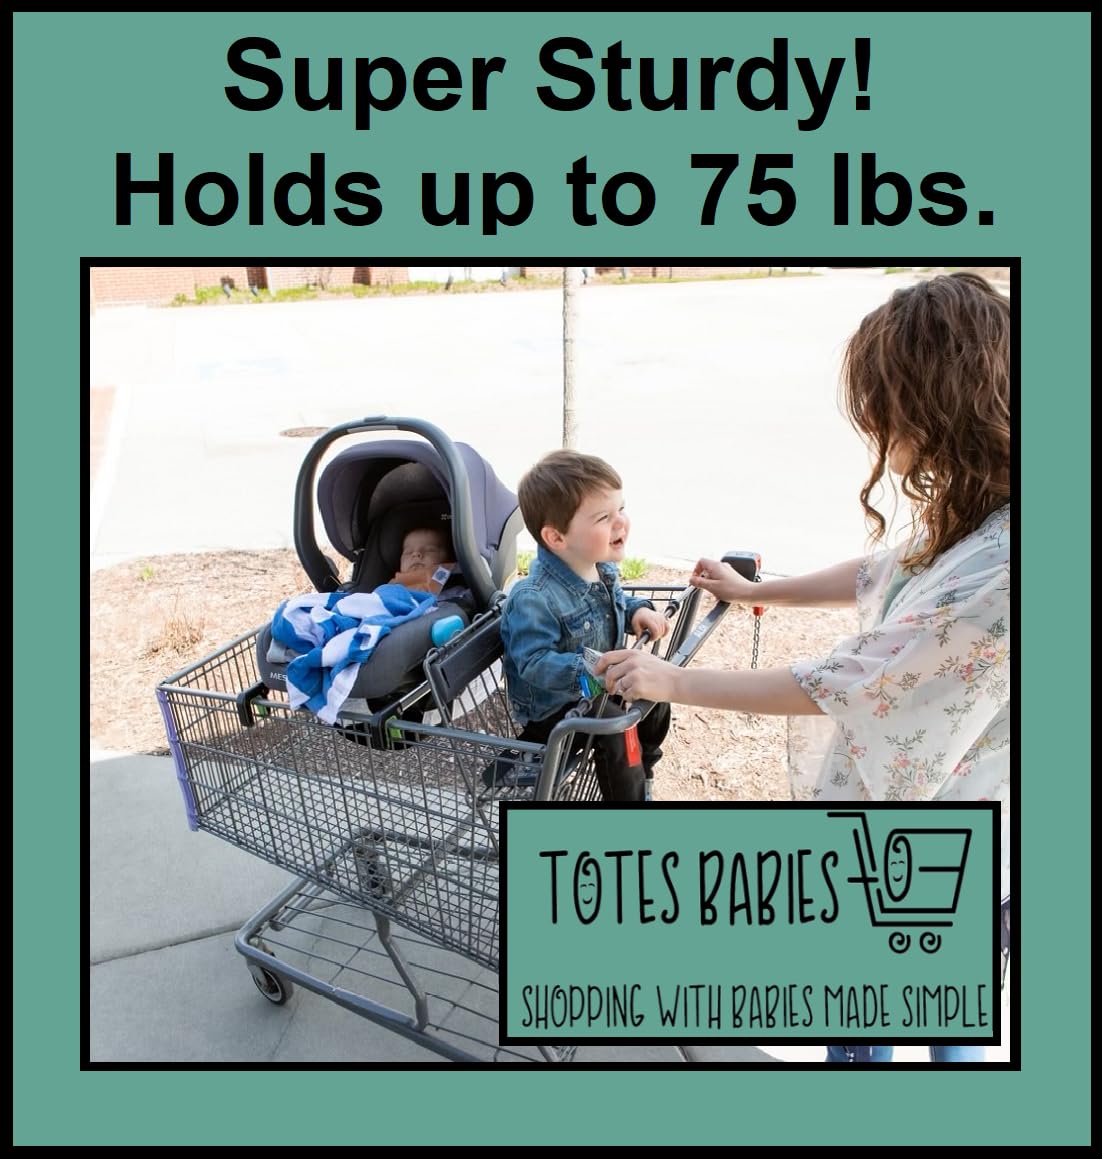 Totes Babies - Car Seat Carrier for Shopping Carts, Allows Babies, Newborns, Infants and Toddlers to Stay Snug or Sleeping in Car Seat While Parents Shop, As Seen on Shark Tank - Totes Babies Car Seat Carrier Review